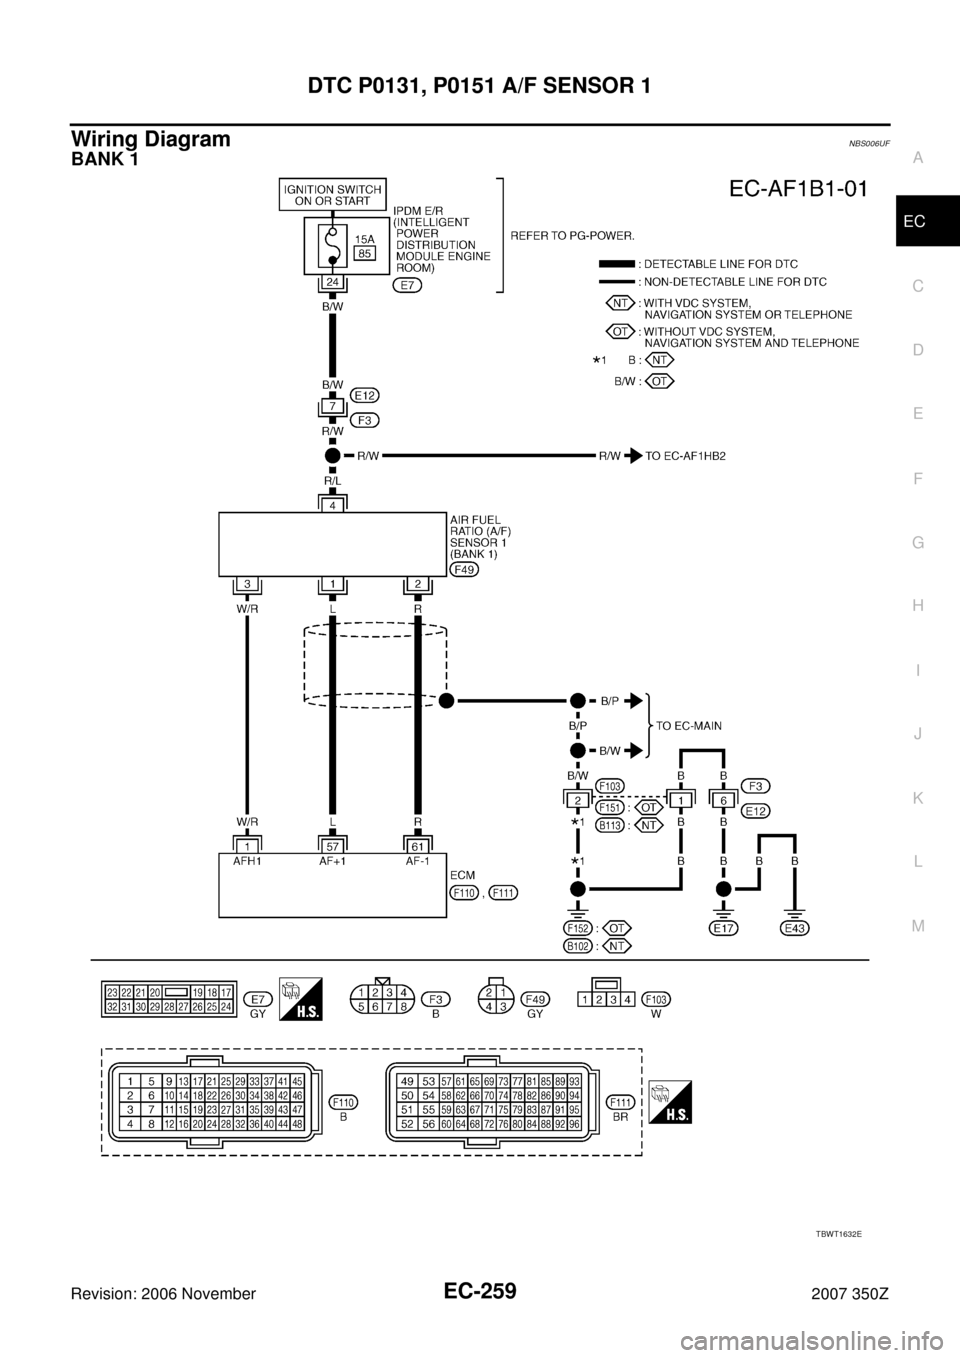 NISSAN 350Z 2007 Z33 Engine Control Service Manual DTC P0131, P0151 A/F SENSOR 1
EC-259
C
D
E
F
G
H
I
J
K
L
MA
EC
Revision: 2006 November2007 350Z
Wiring DiagramNBS006UF
BANK 1
TBWT1632E 